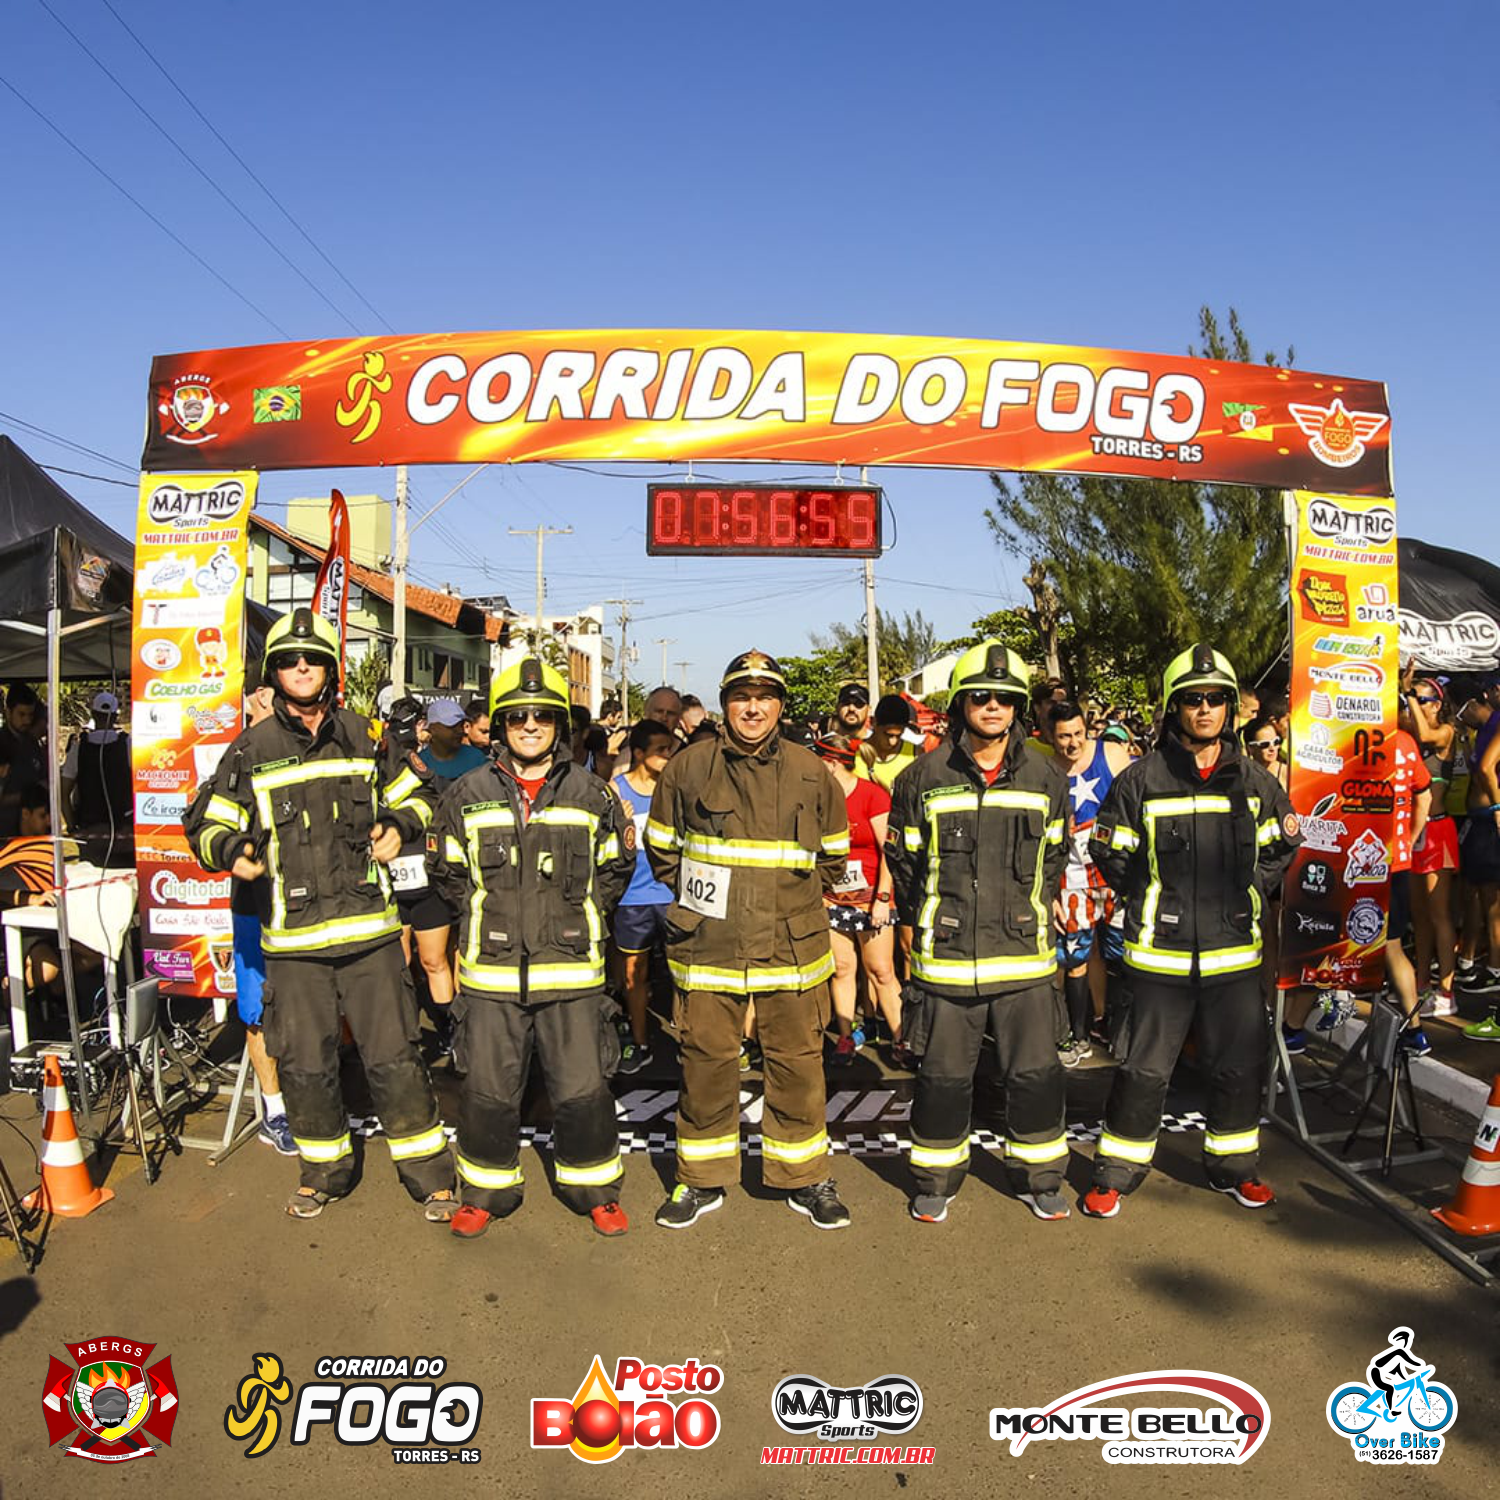 You are currently viewing 2ª Corrida do Fogo – Torres/RS